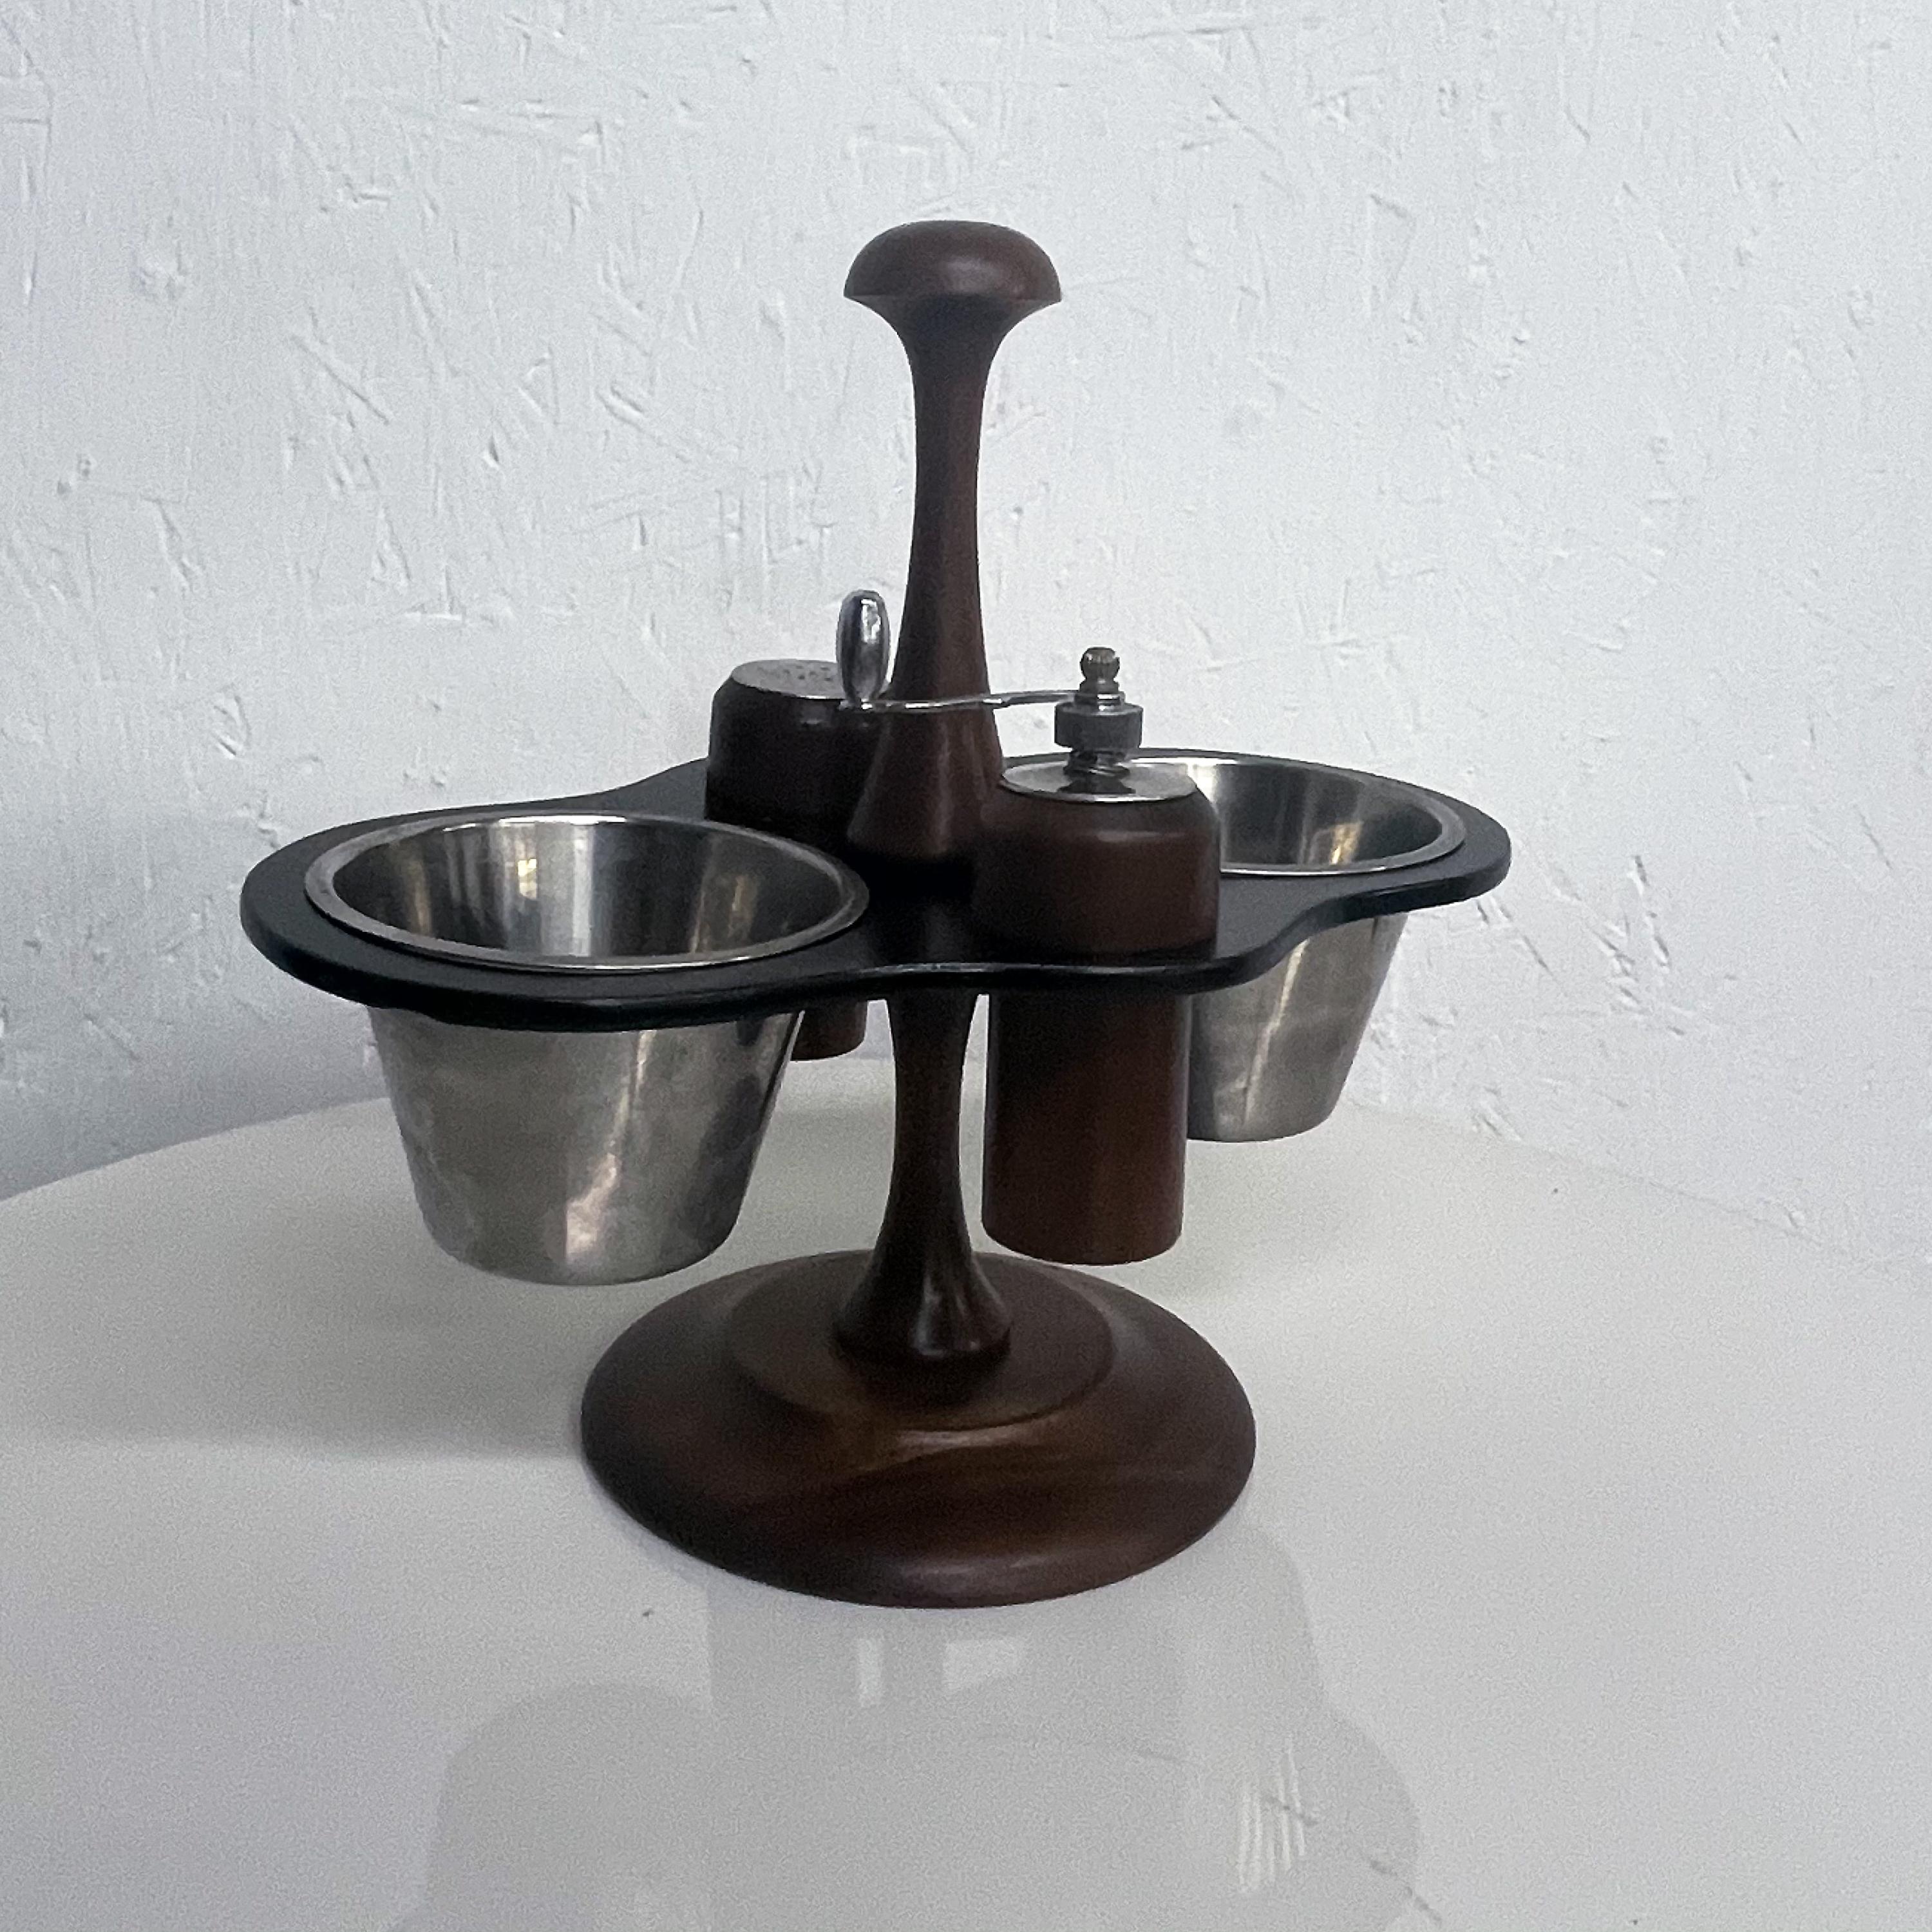 By Margaret Studios Norway Condiment Caddy Carousel swivel with salt pepper shakers and 2 small Condiment bowls Mid-Century Modern Collectible
Measures: 11.25 T x 10.25 x 7 W
Made in Norway, Lazy Susan swivel service set for dining table